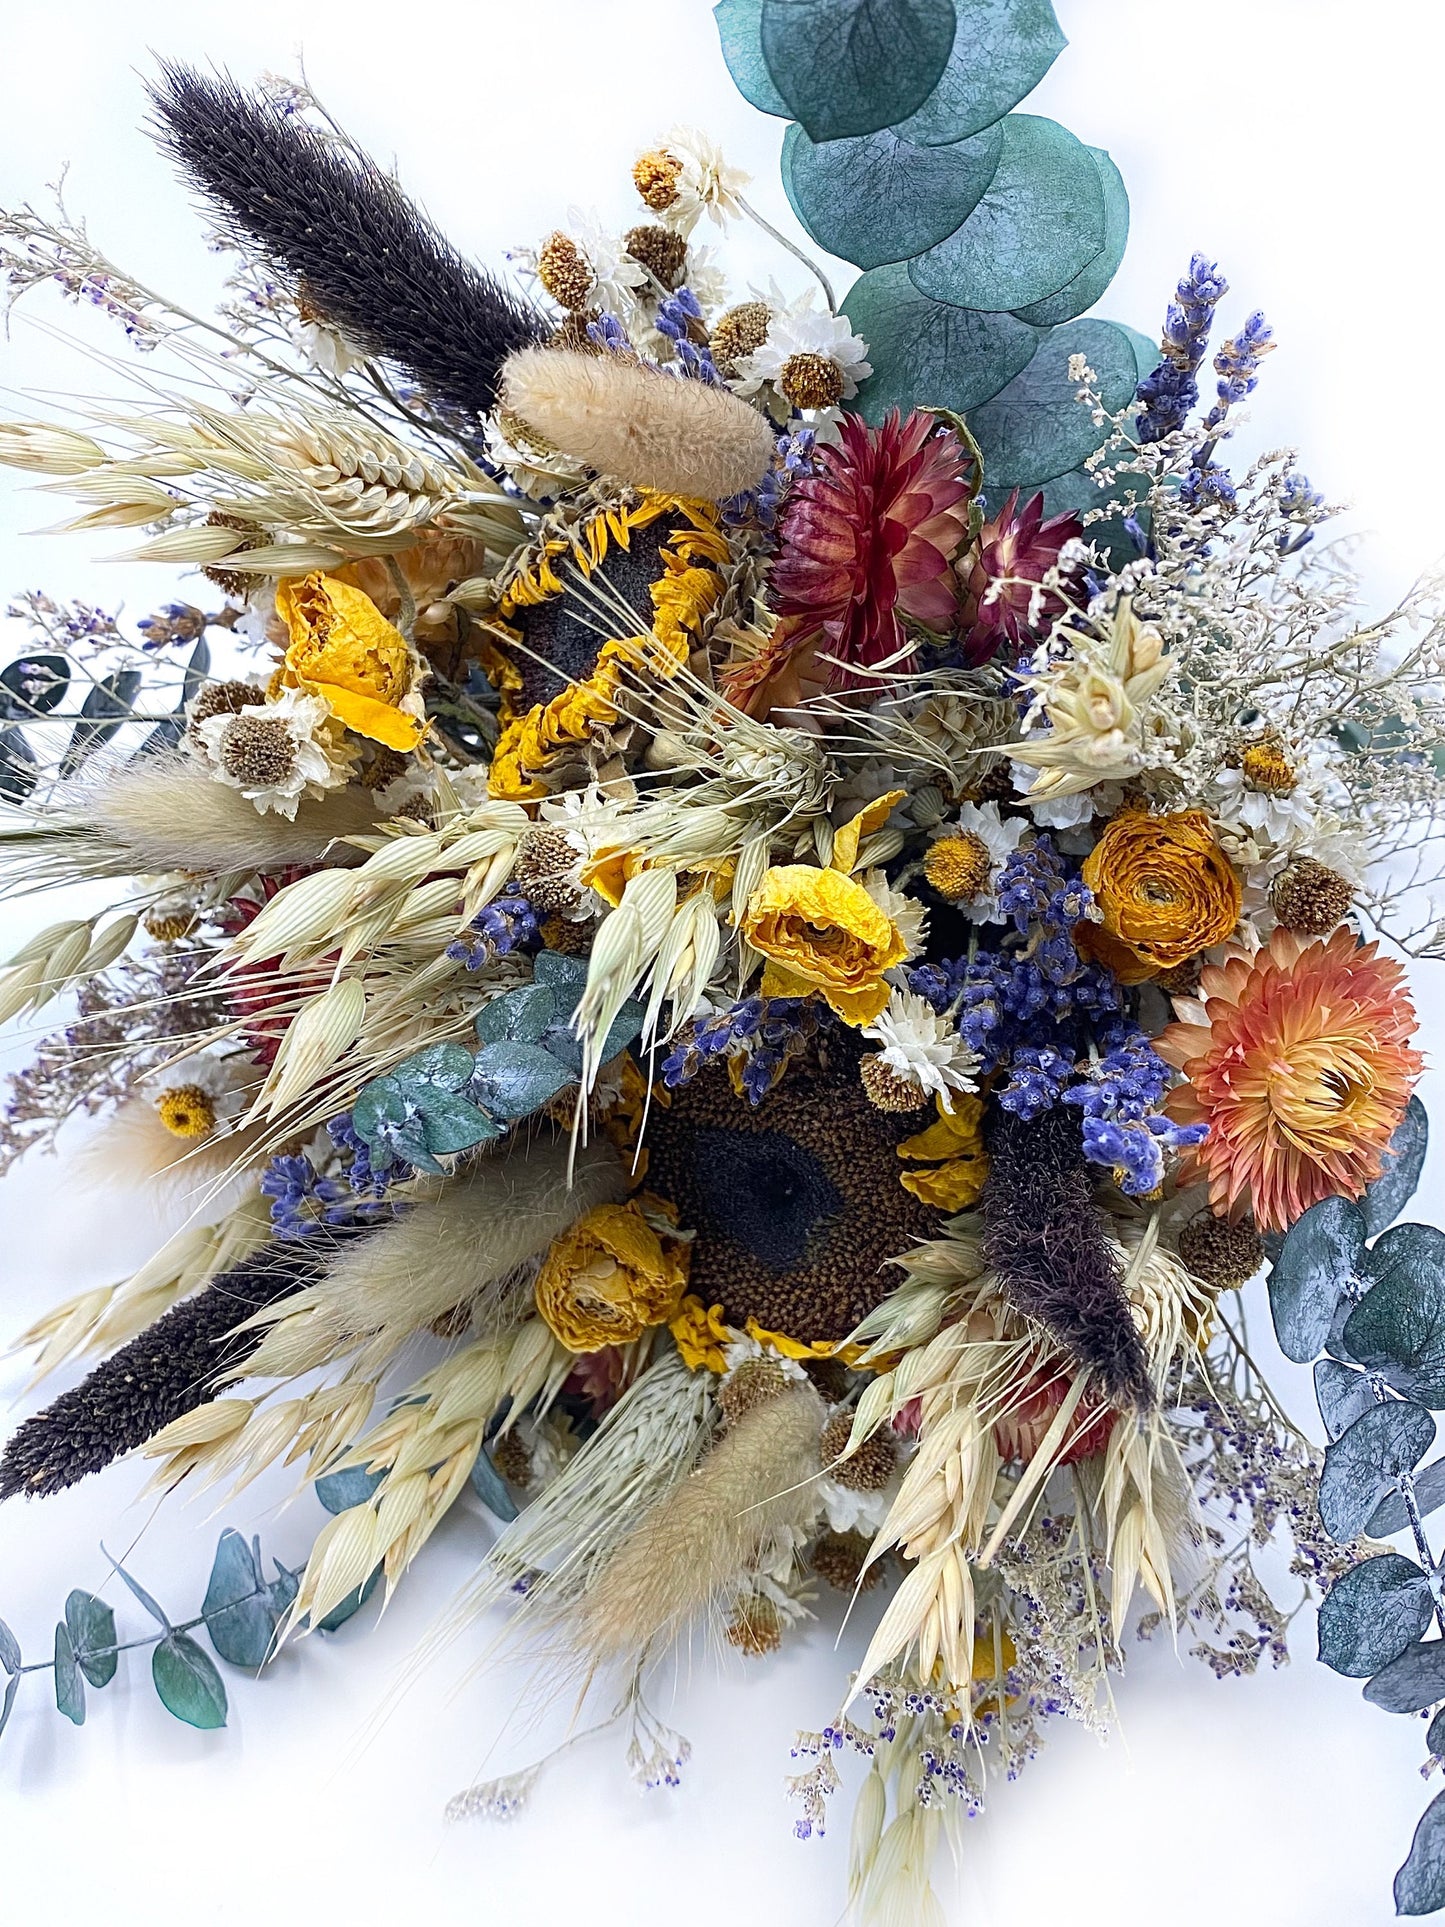 Sunflower Wedding bouquet, Summer, Fall, Wildflowers, Dried Flowers, Boho, Preserved, Floral, Orange, Bridal, Fall Colors, Strawflowers